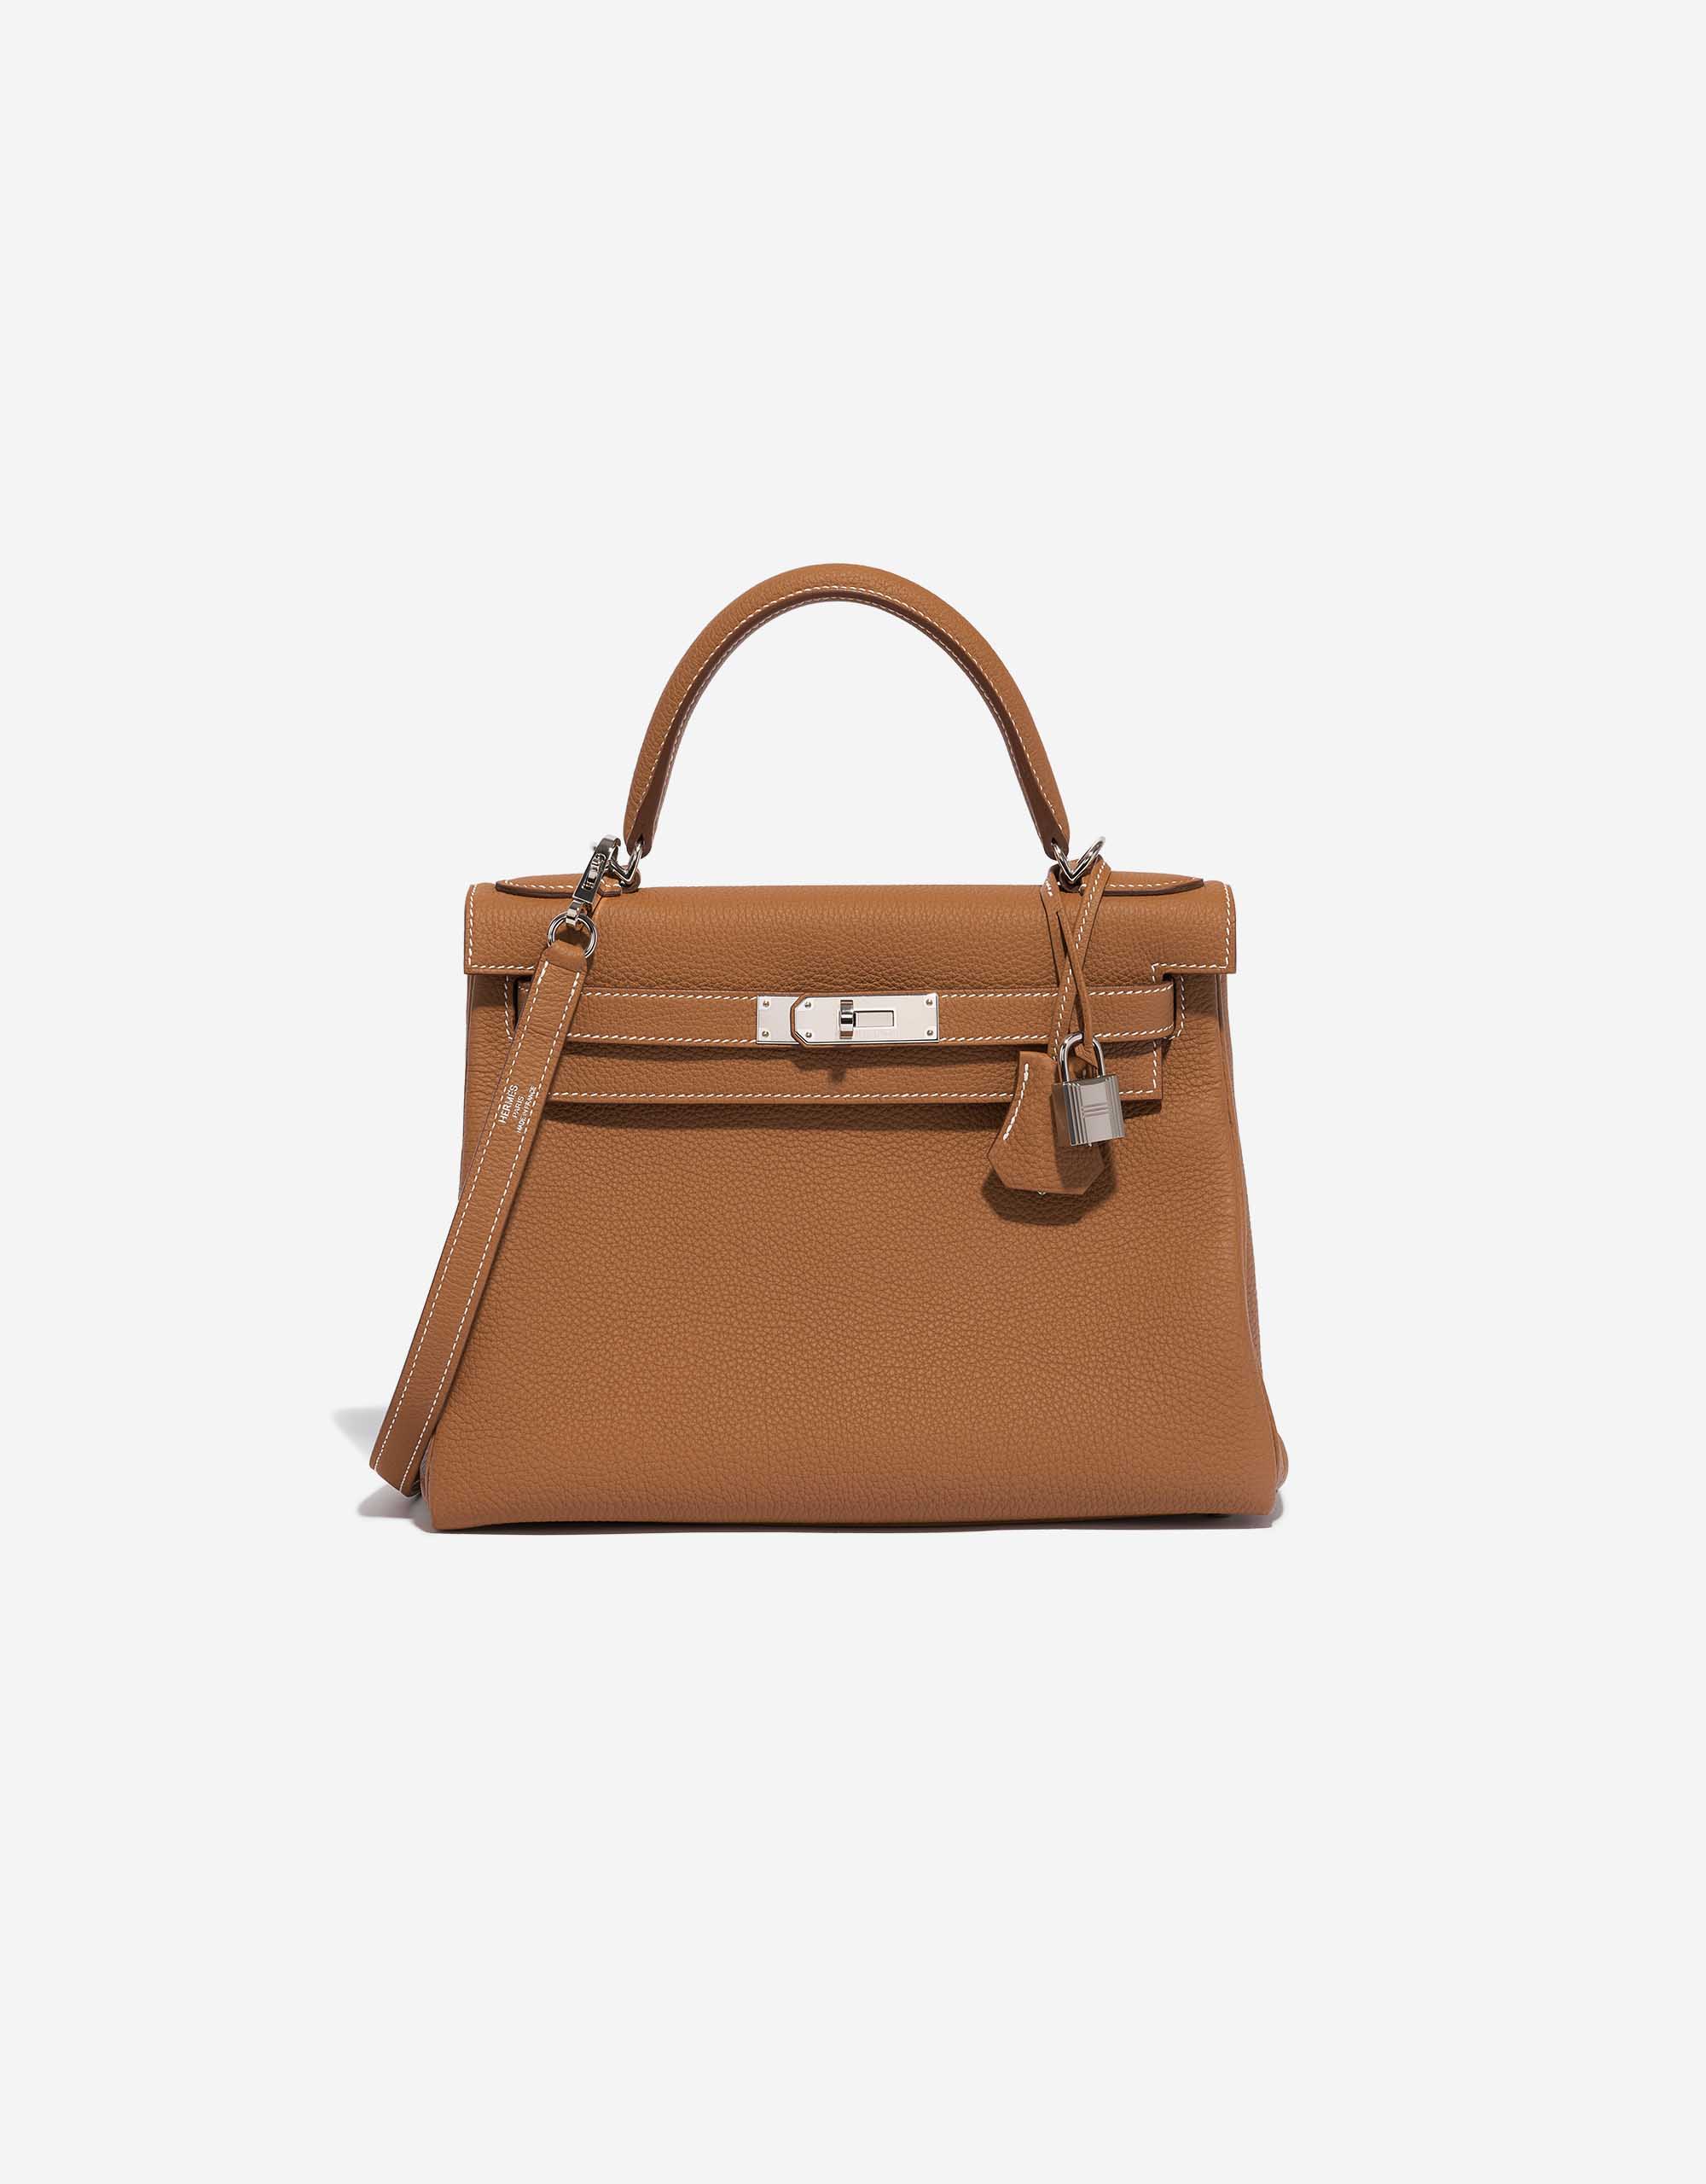 Everything About The Hermes Kelly Bag: Sizes, Prices, History Bagaholic ...